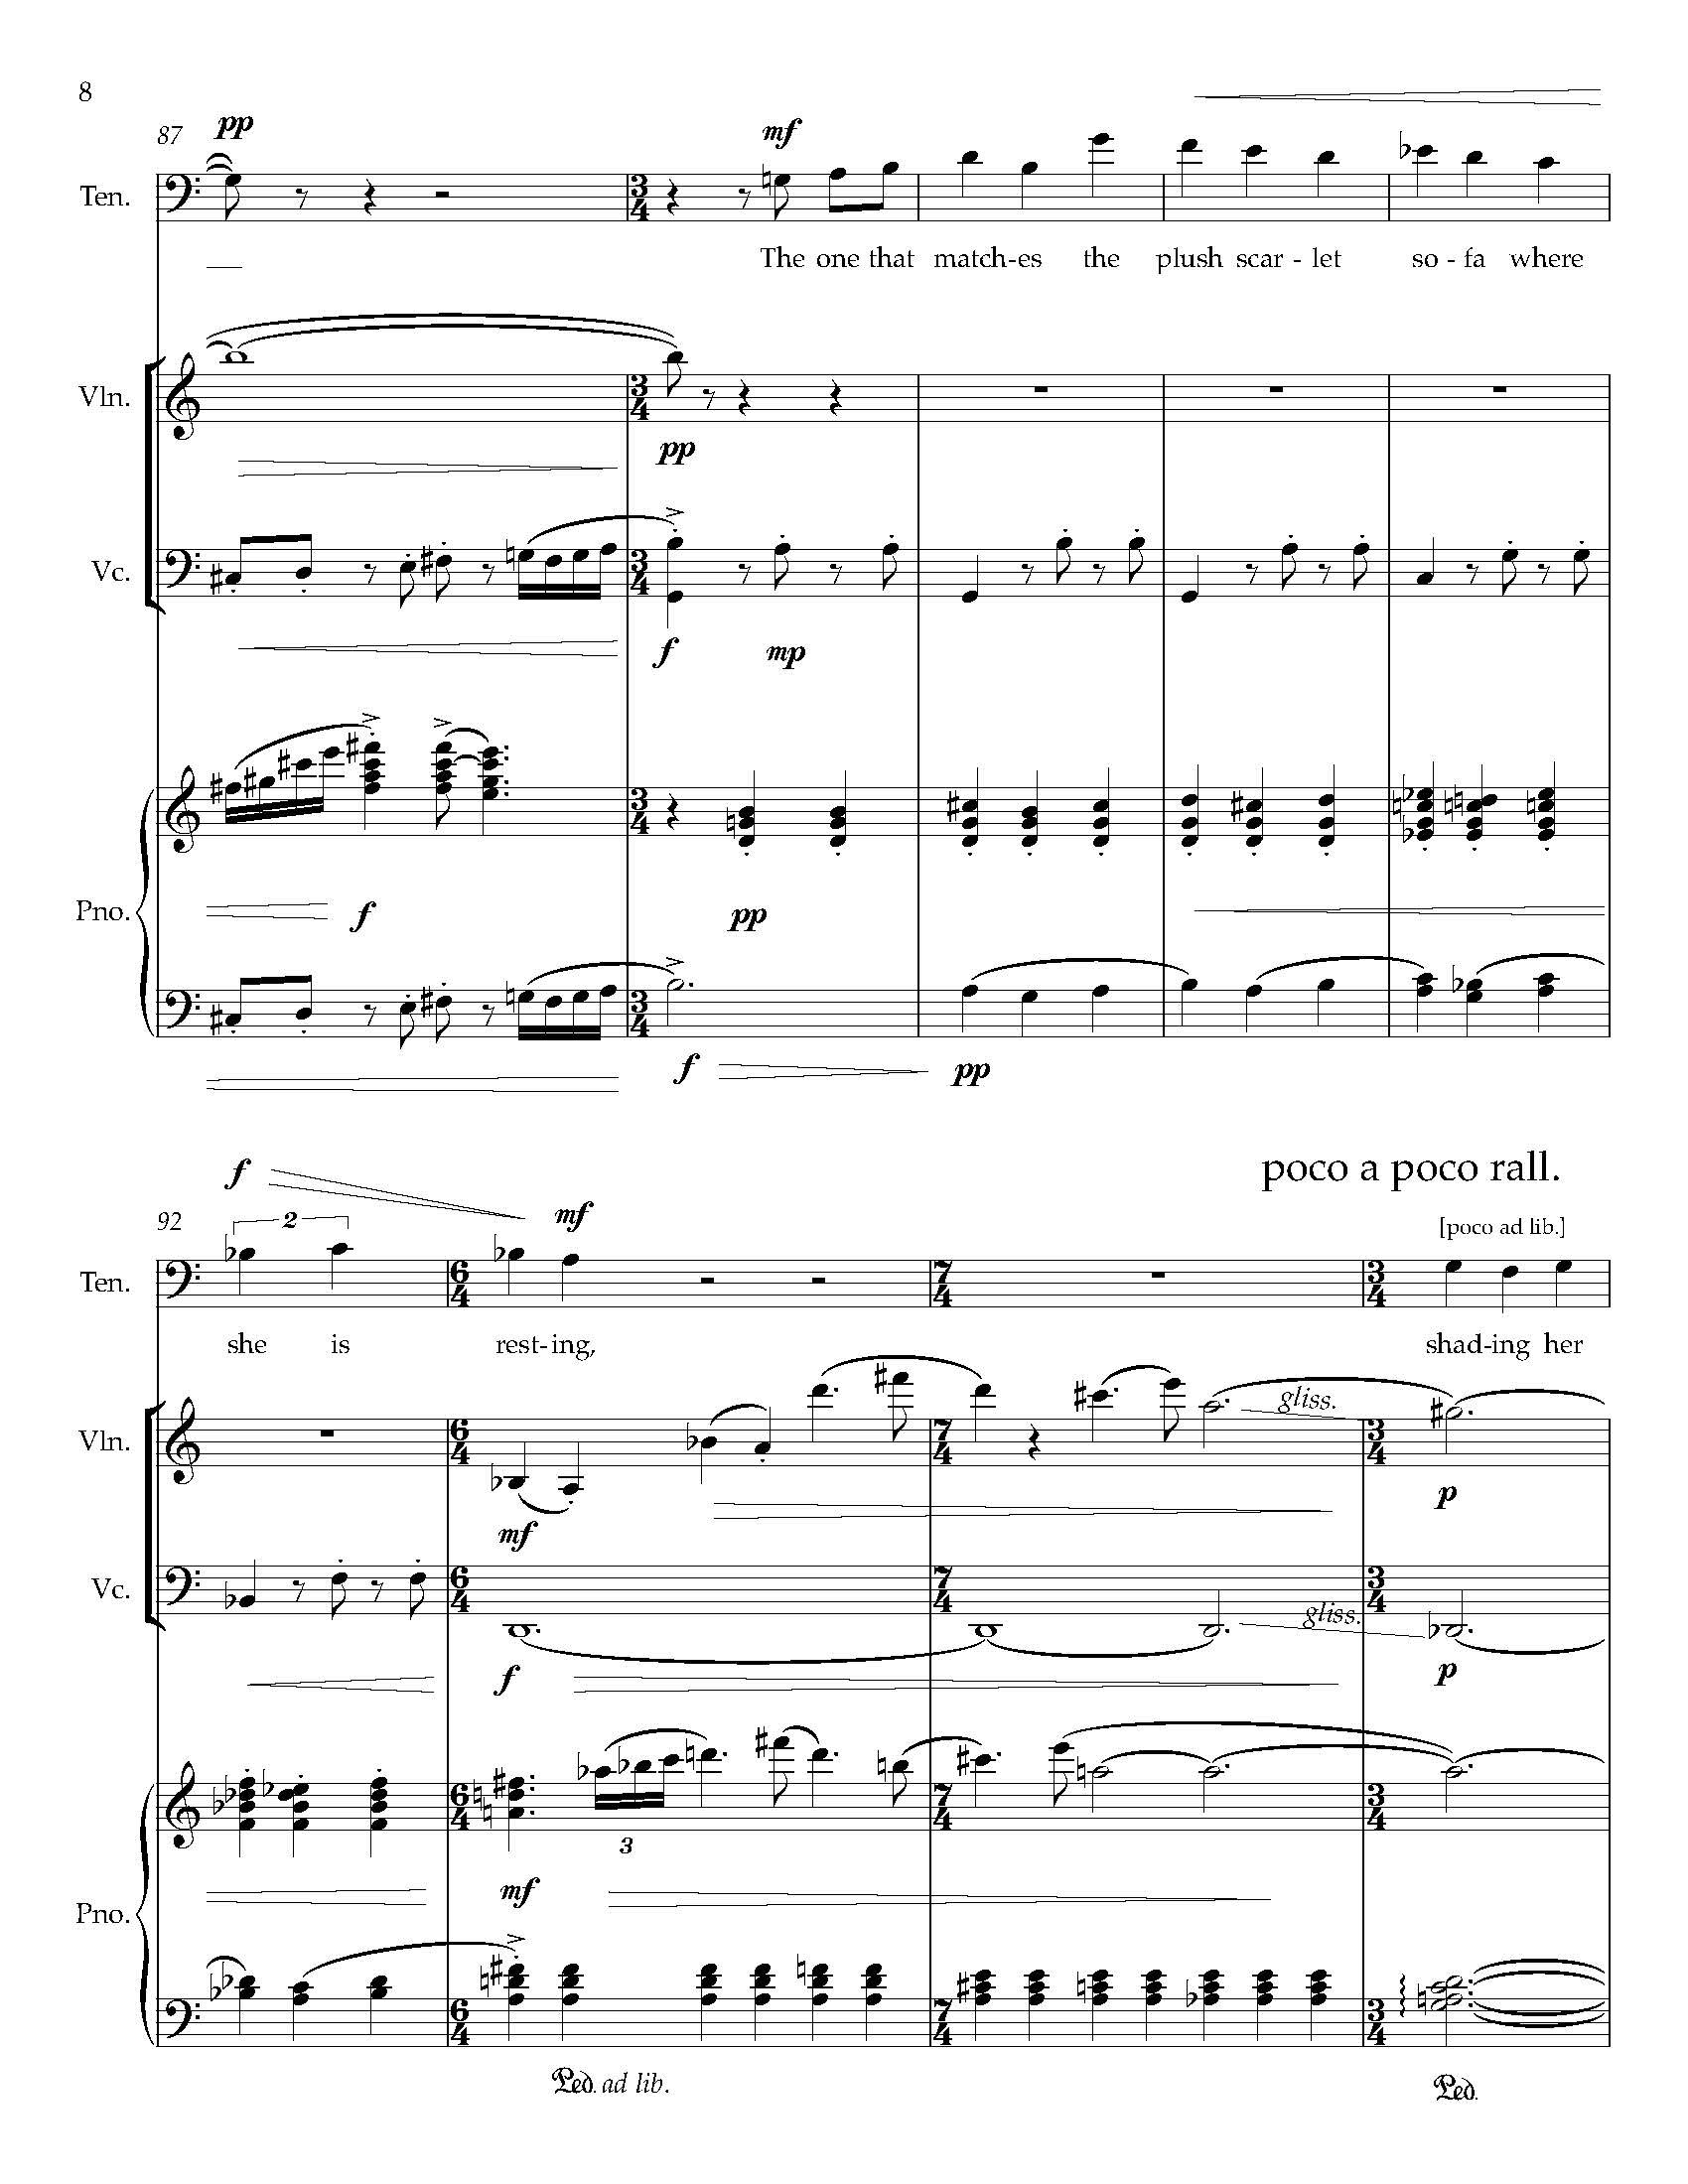 Gursky Songs - Complete Score_Page_16.jpg